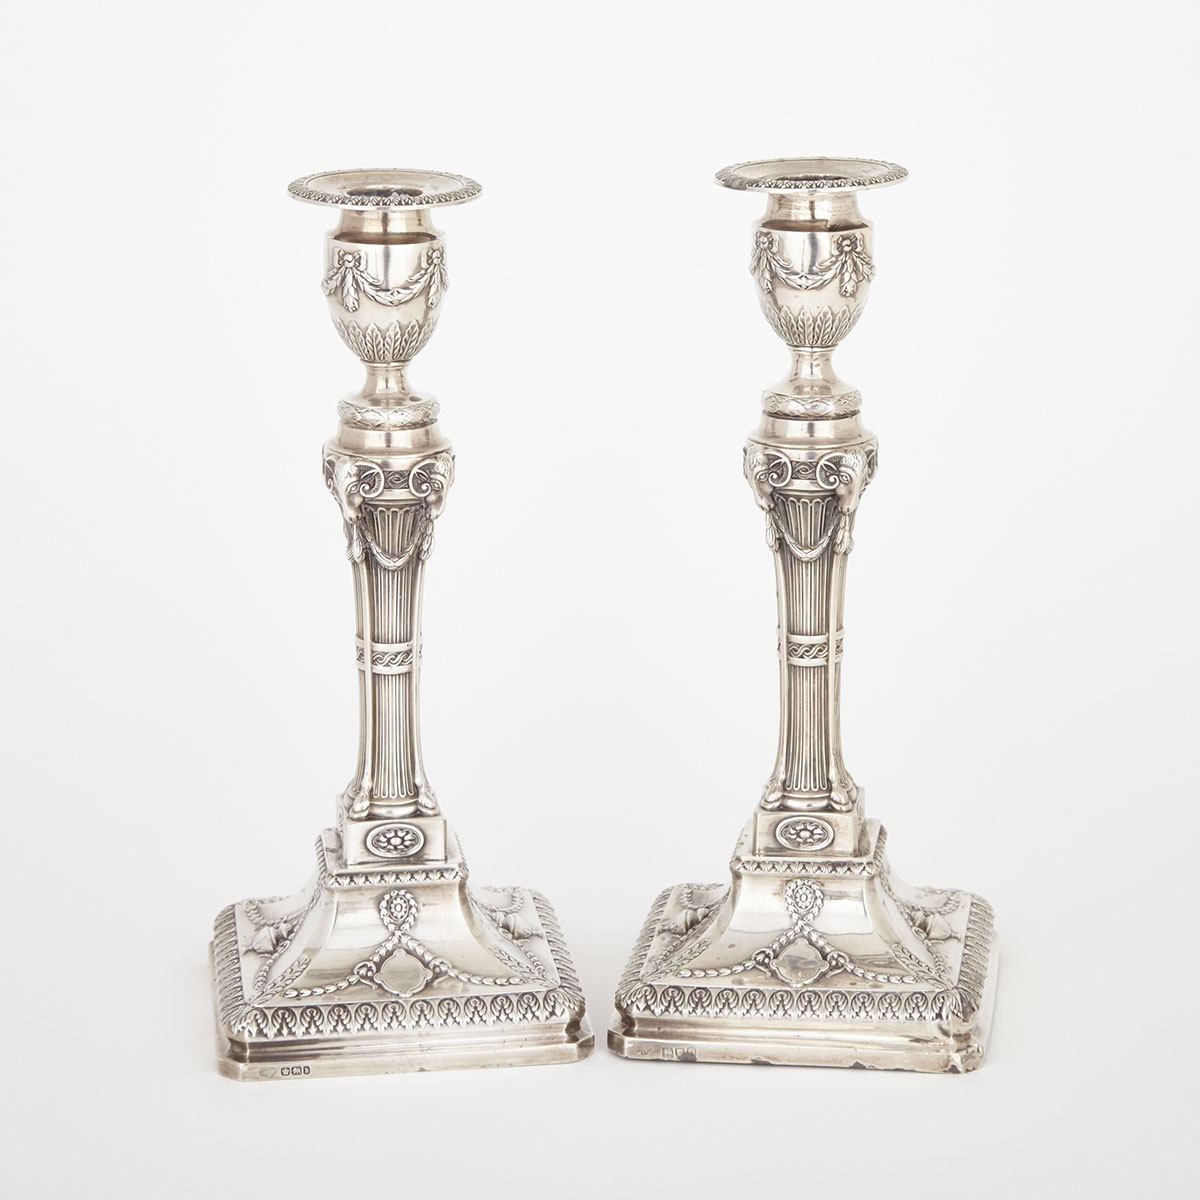 Pair of Late Victorian Silver Table Candlesticks, Goldsmiths & Silversmiths Co., London and Sheffield, 1900